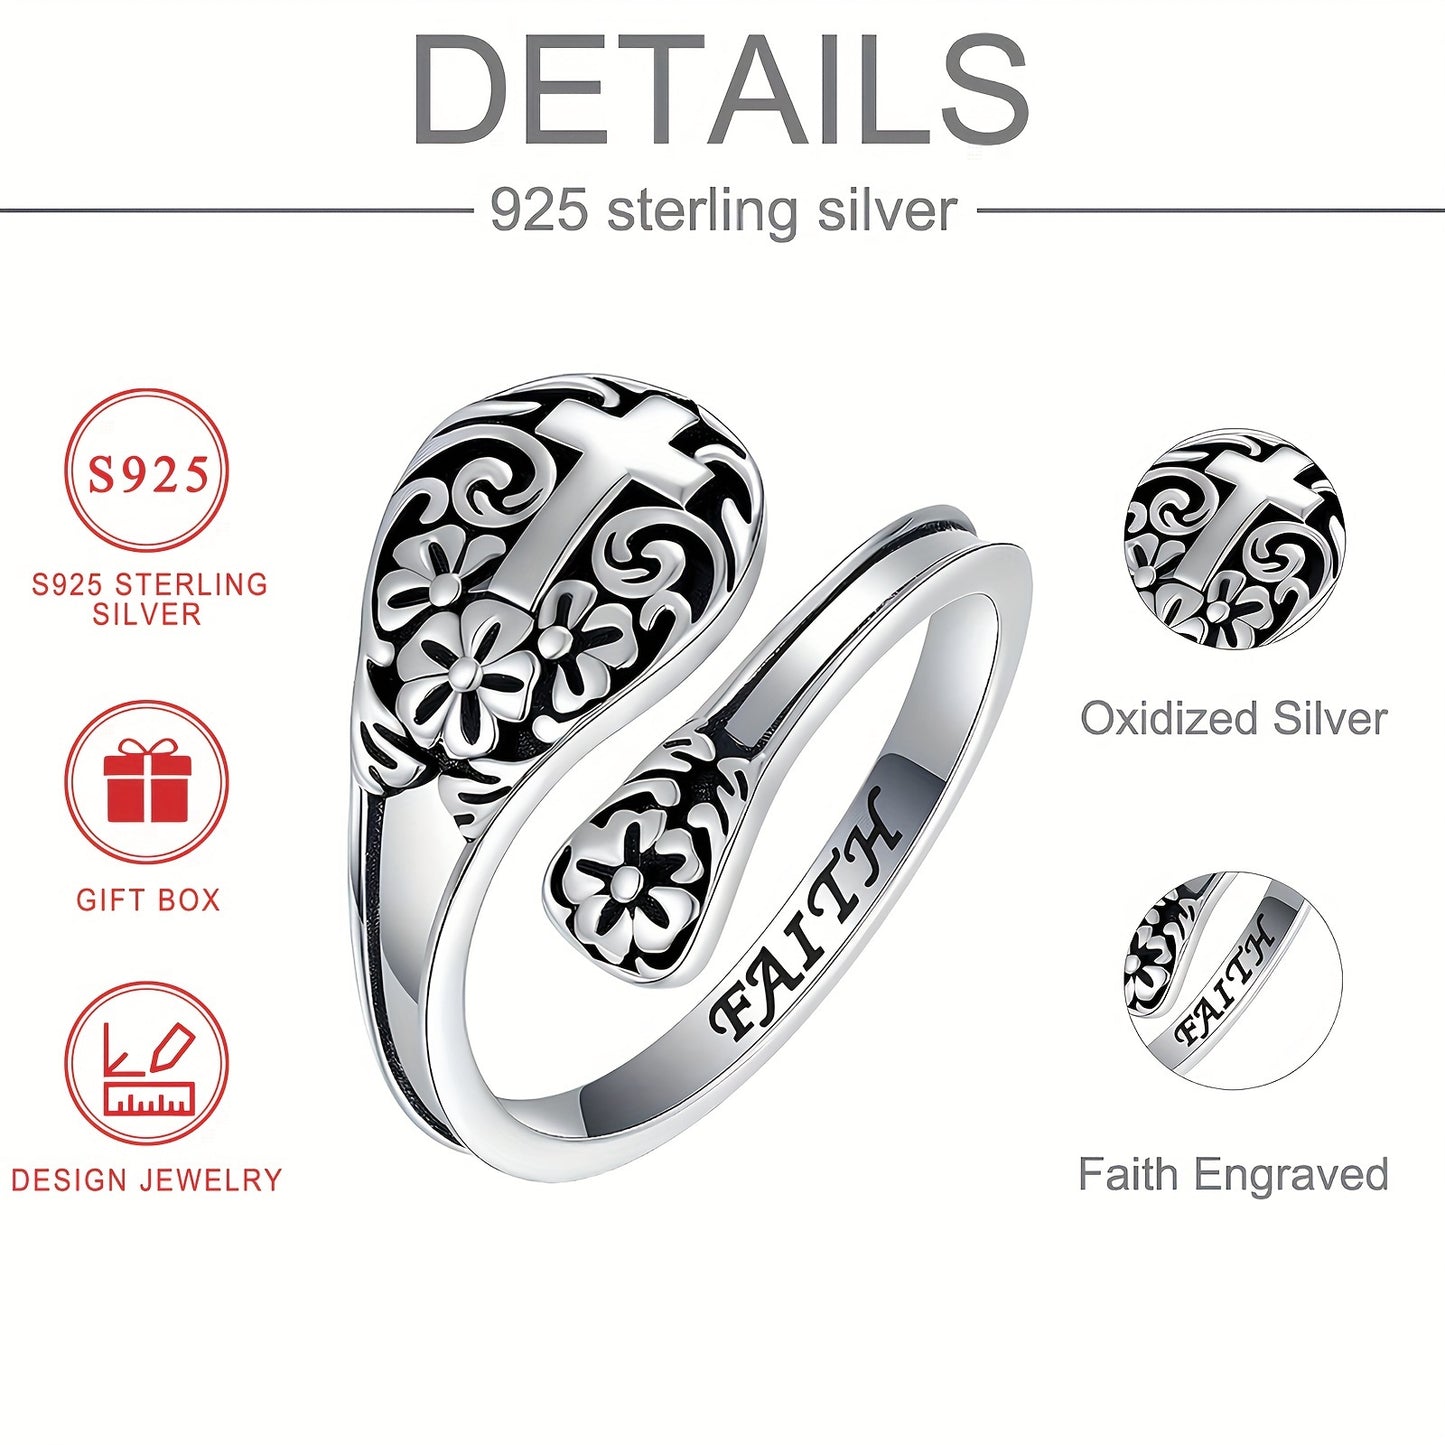 925 Sterling Silver Spoon Ring 18k Gold Plated Retro Cross + 3D Flower Design Suitable For Men And Women Match Daily Outfits With Gift Box